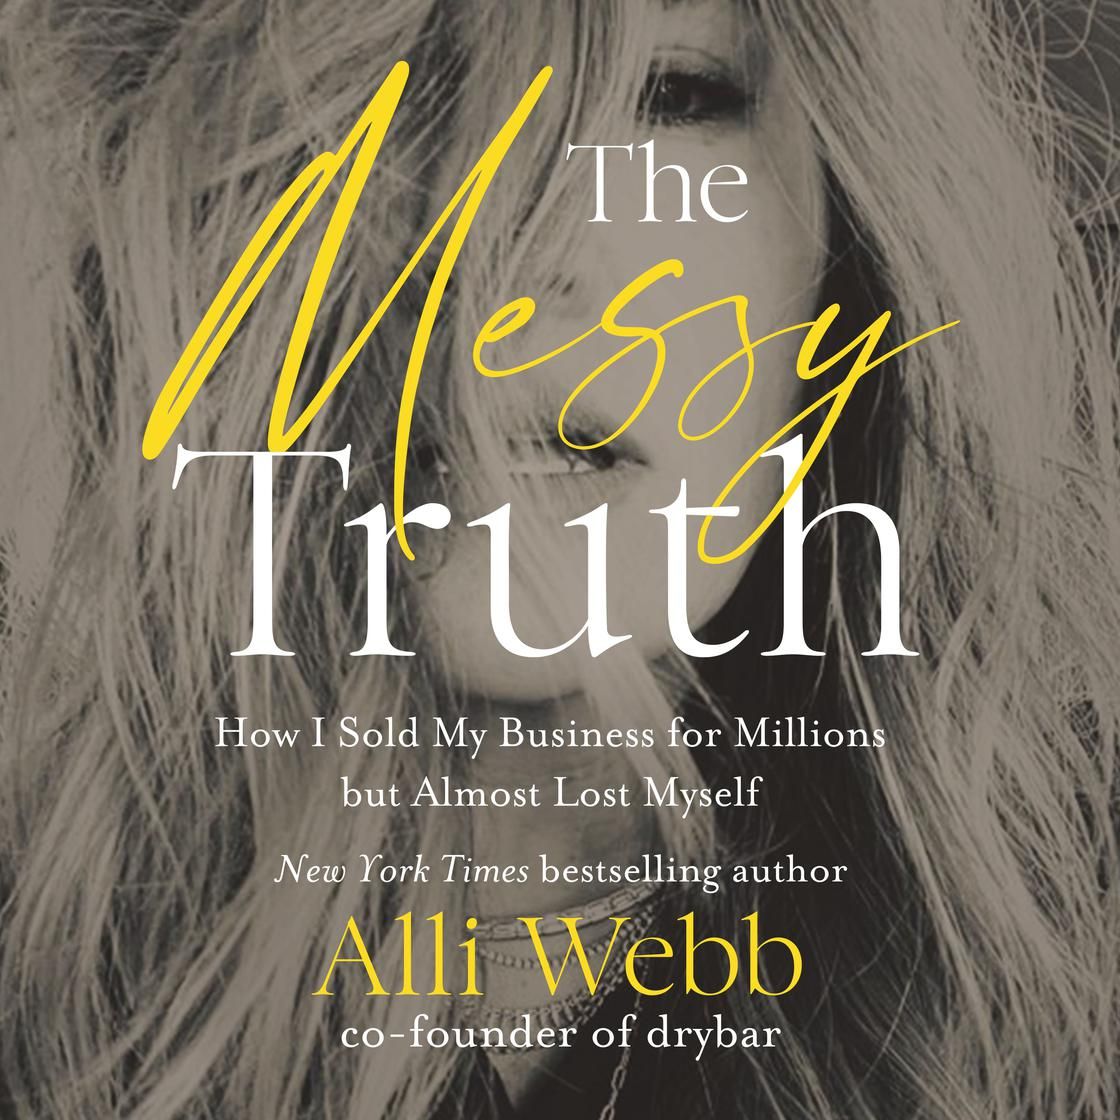 The Messy Truth | Libro.fm (US)